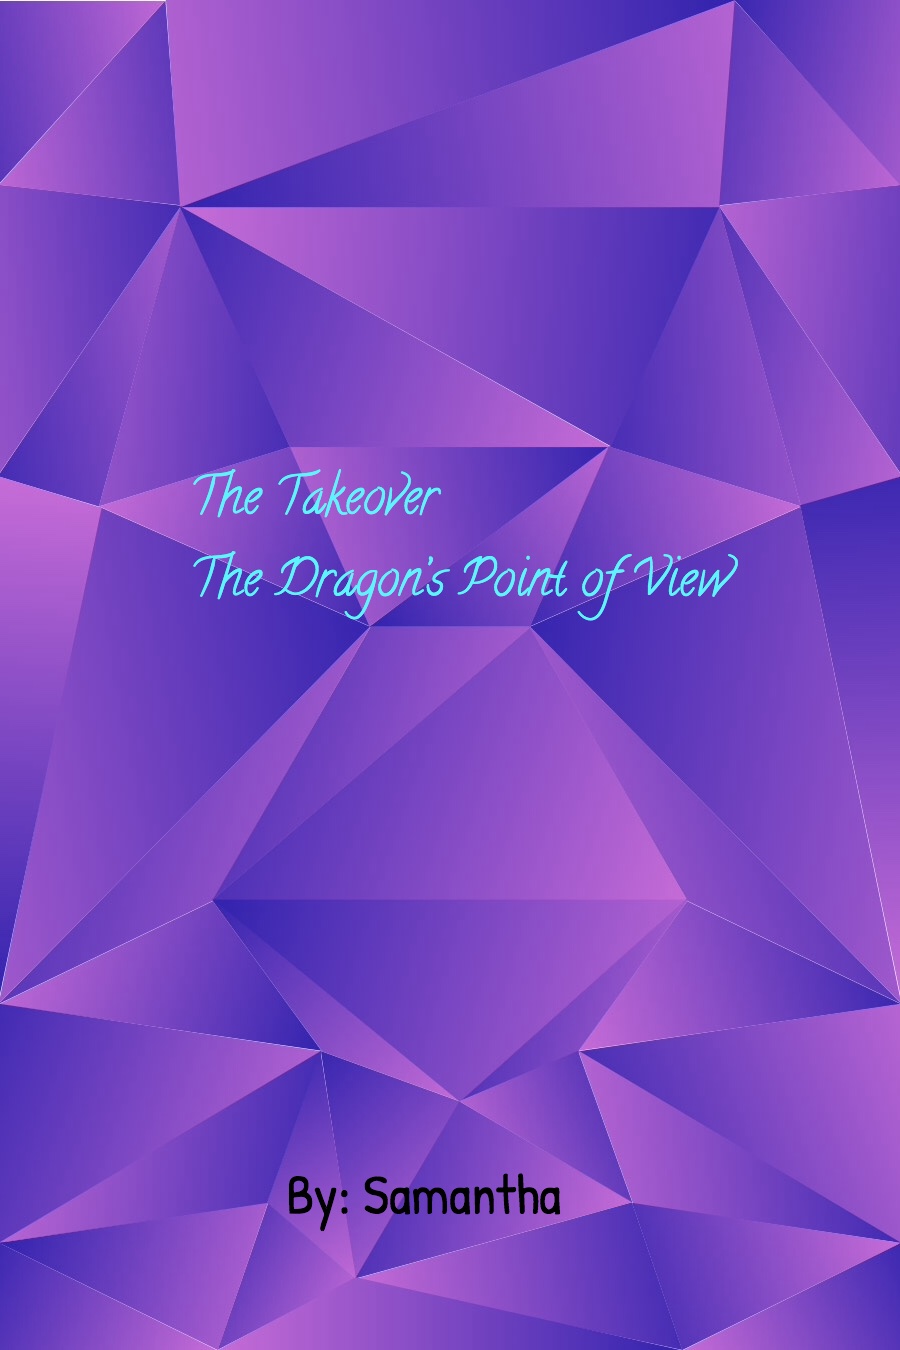 The Takeover: The Dragon’s Point of View by Samantha S